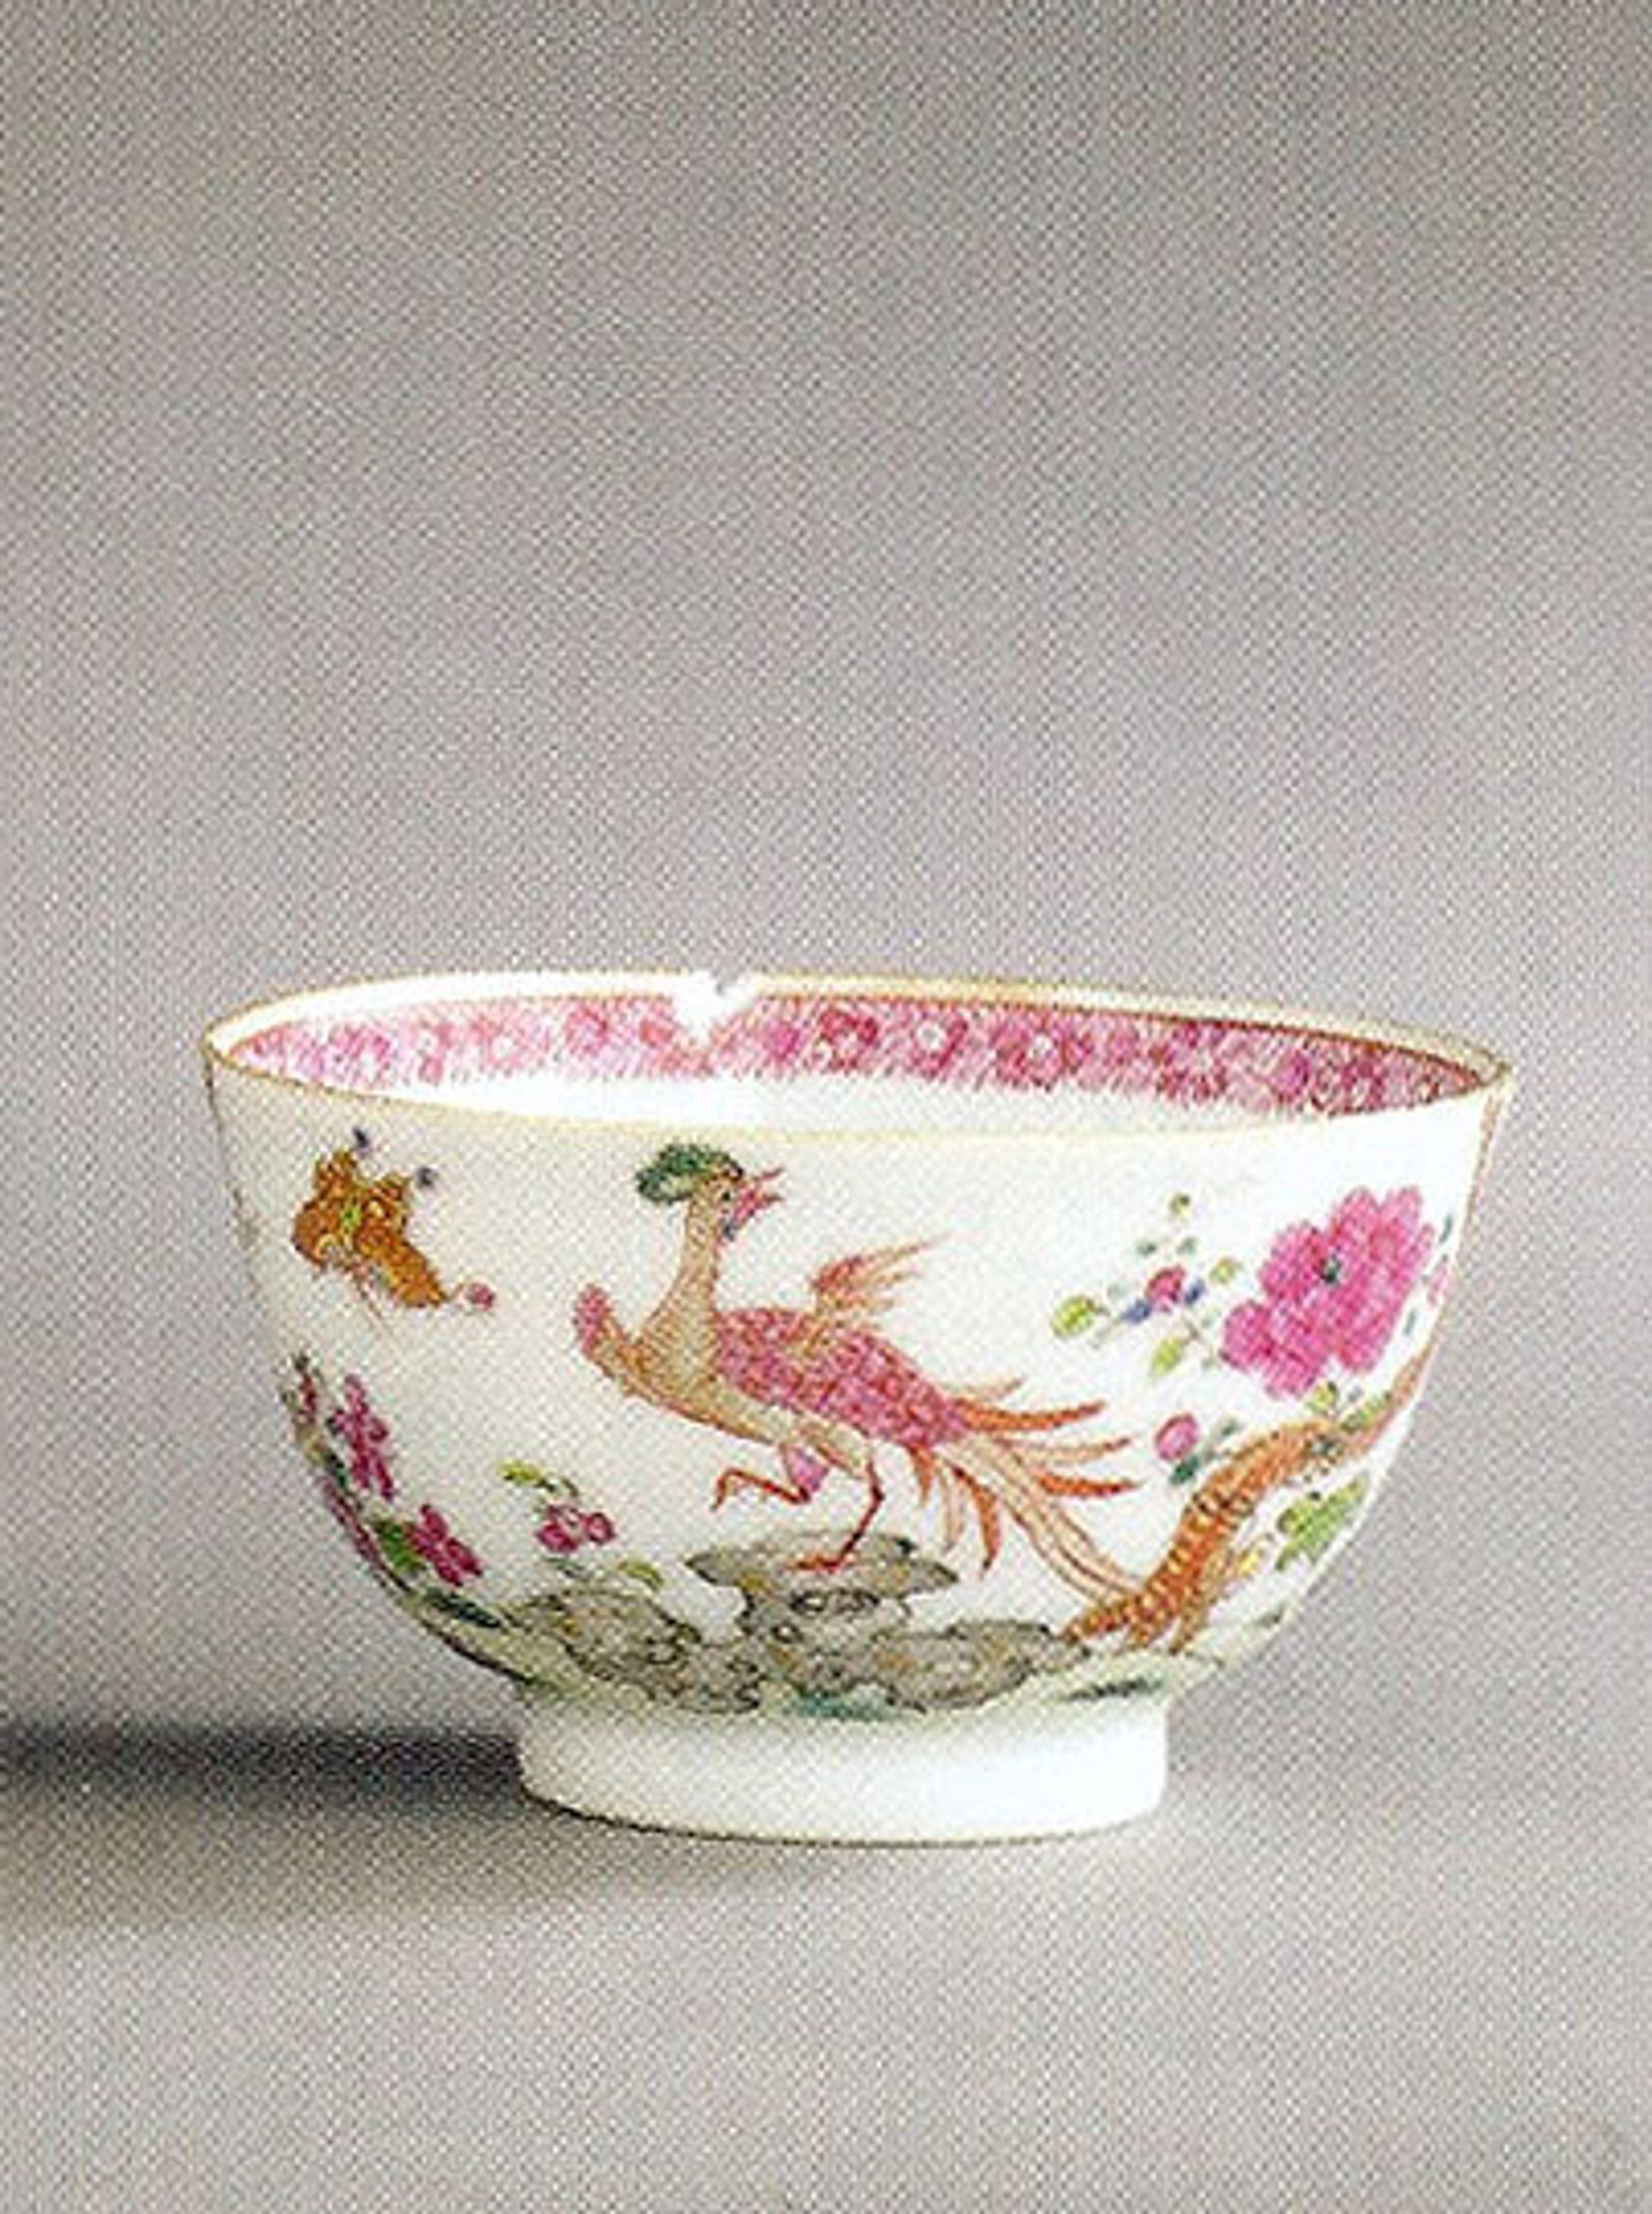 CHINESE EXPORT TEABOWL WITH EXOTIC BIRD, FLOWERING ROCKS AND BUTTERFLY